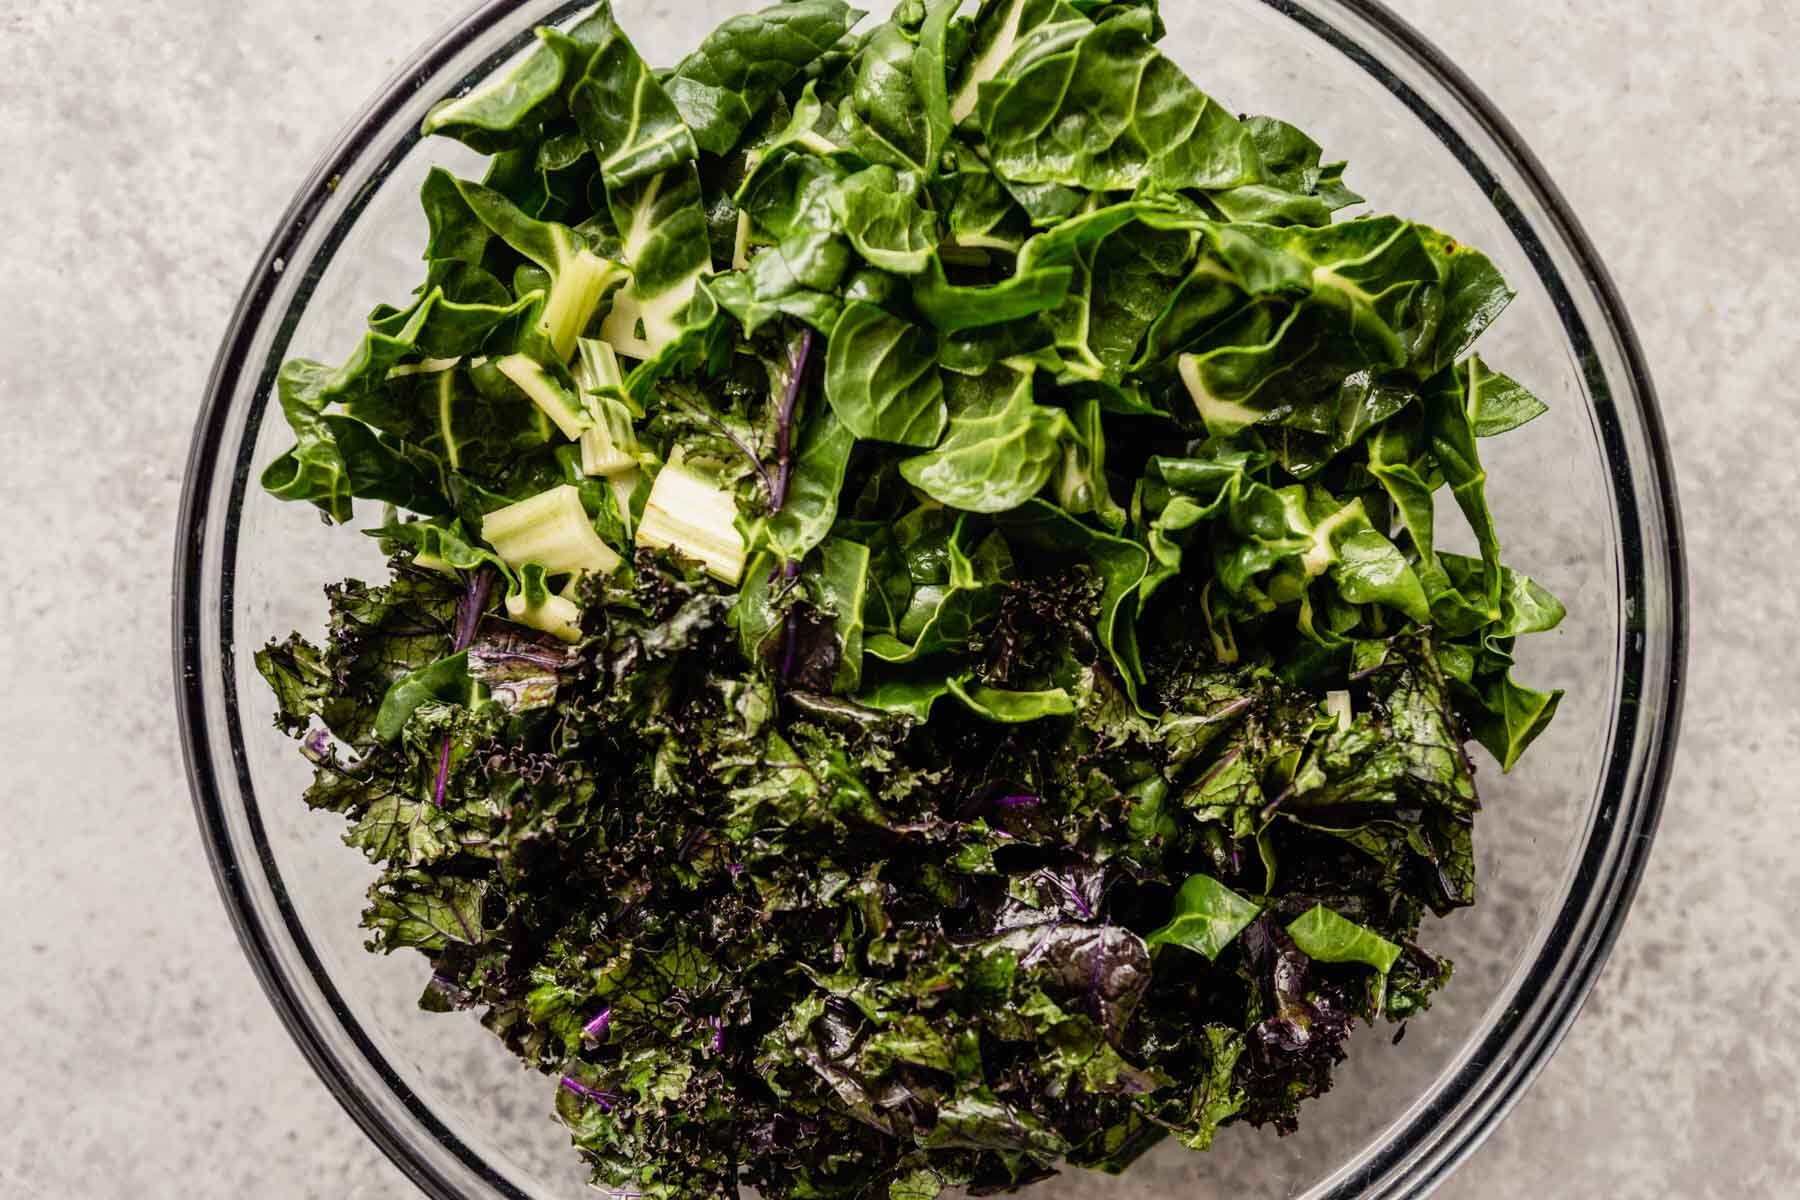 Swiss chard and massaged kale in a large glass mixing bowl.